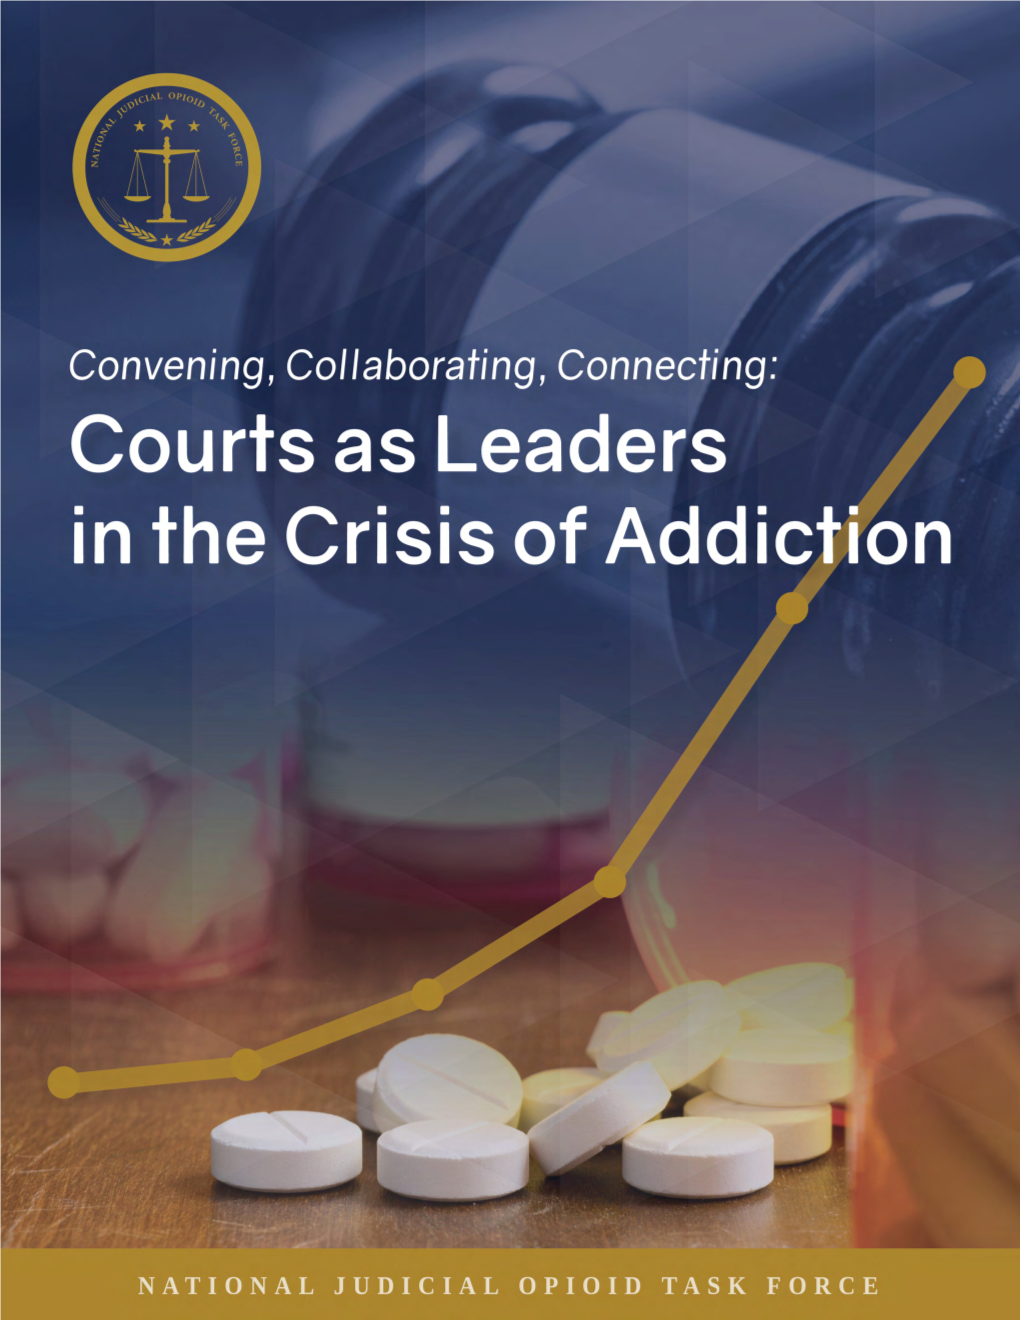 The Criminal Justice System Is the Single Largest Source of Referral to Substance Use Disorder Treatment.*